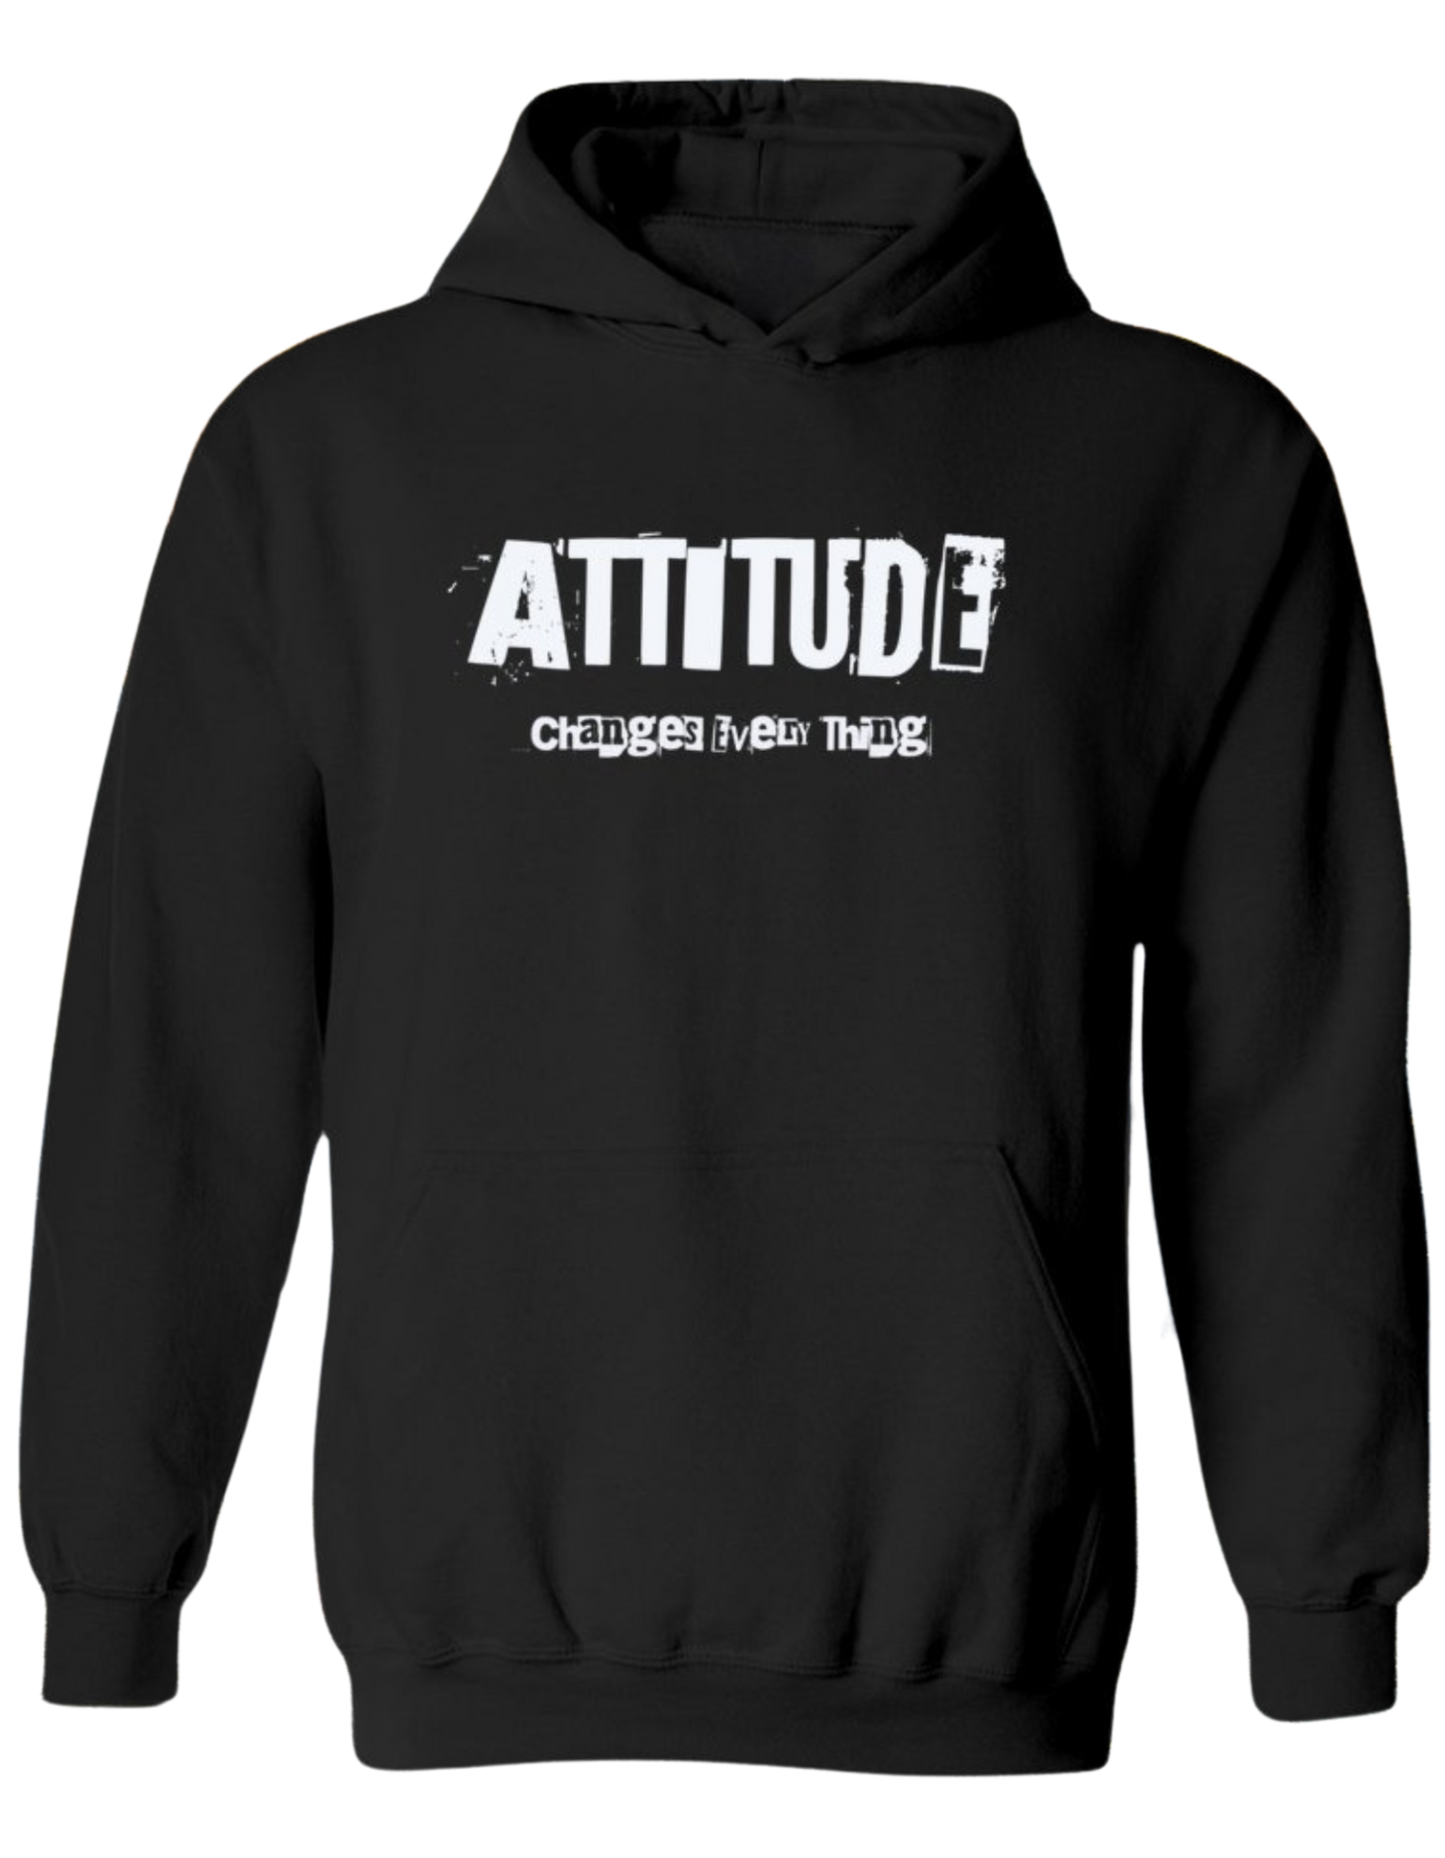 Gildan 1800 Hoodie "Attitude Changes Everything" Hooded Sweatshirt is your ultimate choice for comfort and warmth. Made from a durable blend of 50% pre-shrunk cotton and 50% polyester, it's cozy and versatile, featuring a spacious pouch pocket and matching drawstrings.